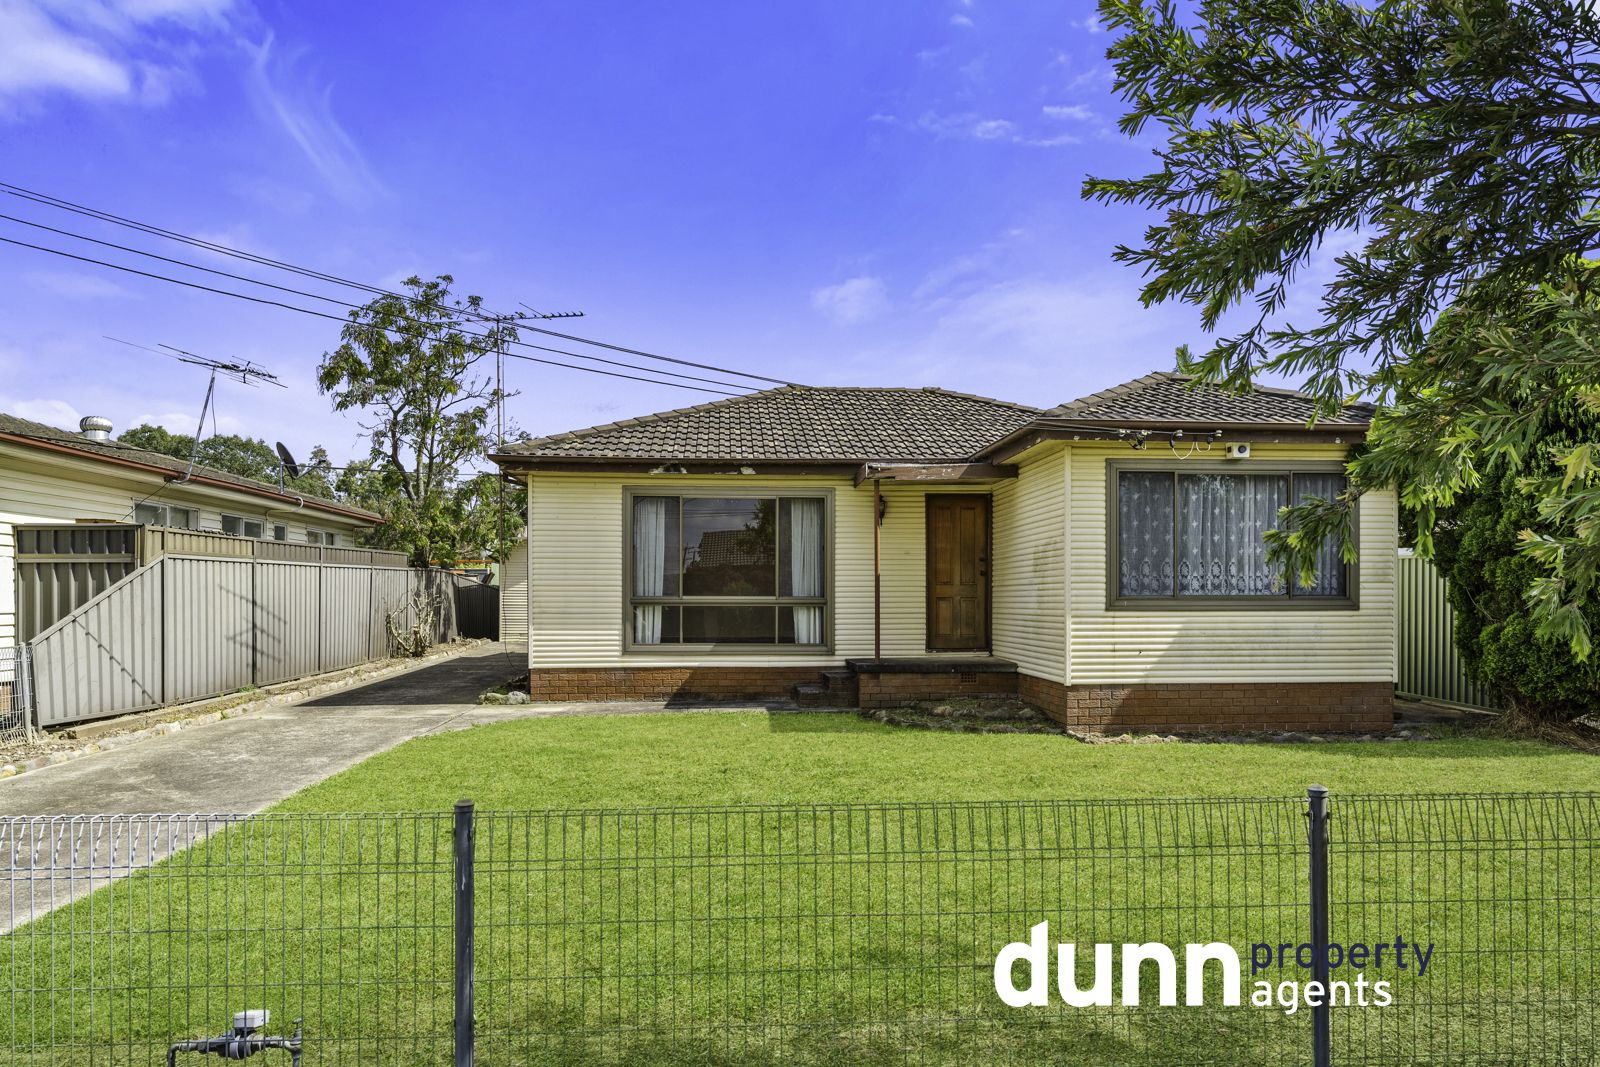 3 bedrooms House in 121 Medley Ave LIVERPOOL NSW, 2170